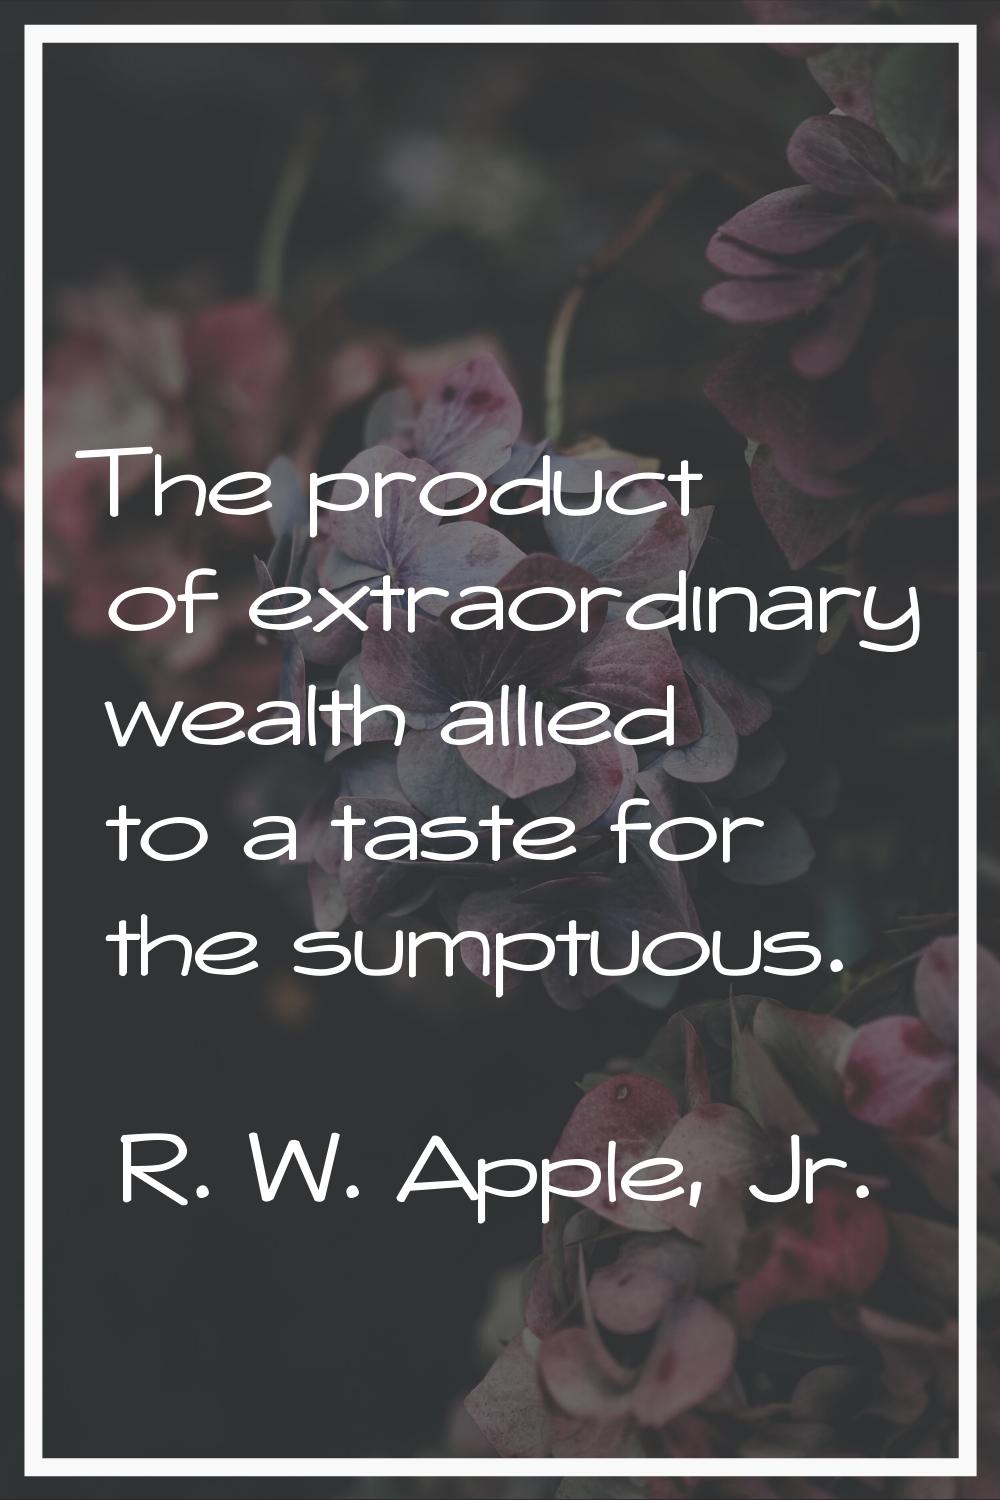 The product of extraordinary wealth allied to a taste for the sumptuous.